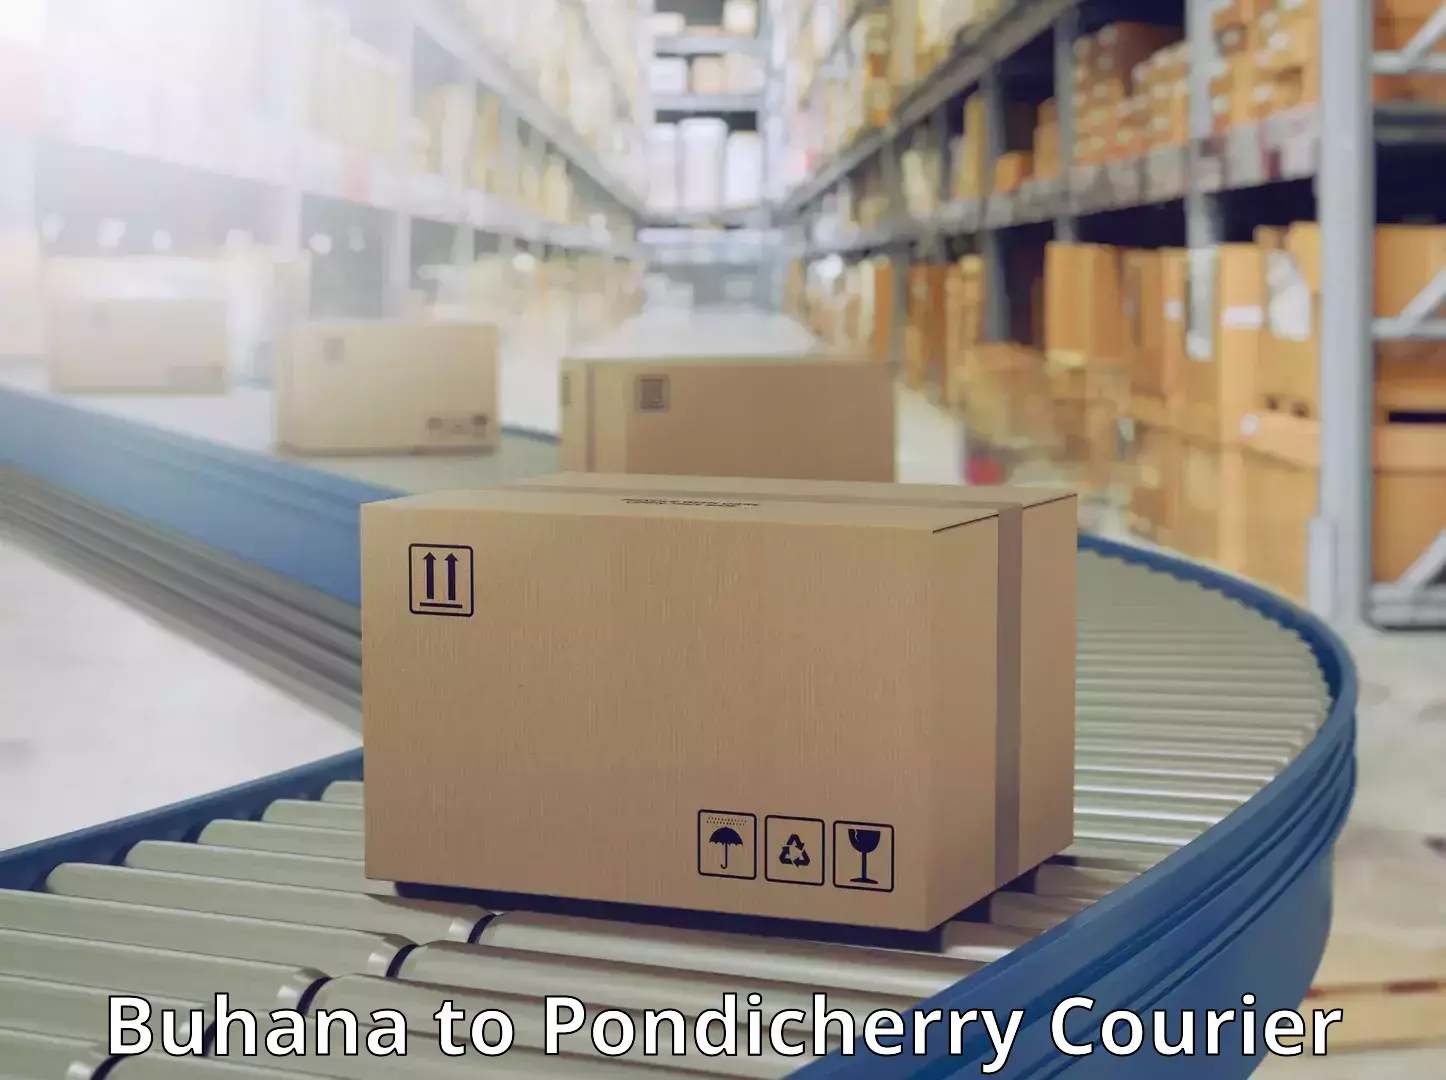 Online package tracking Buhana to Pondicherry